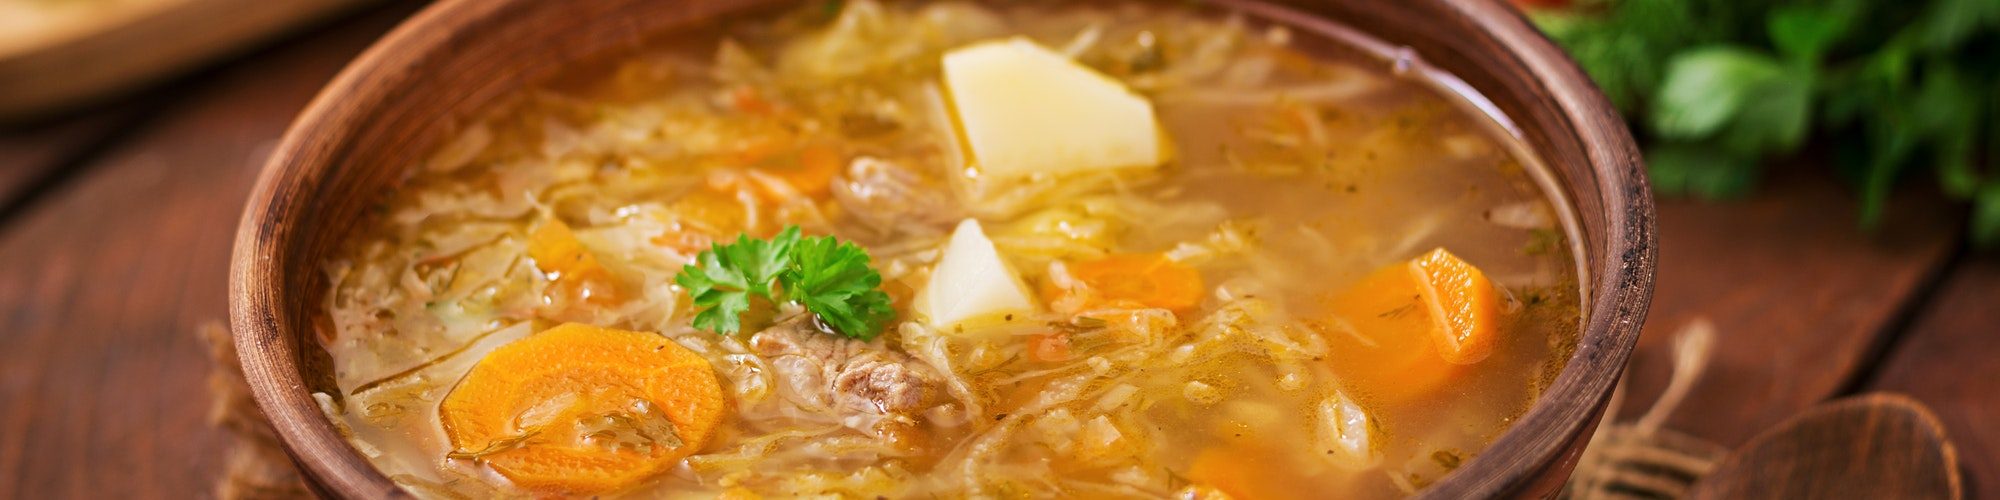 Traditional Russian soup with cabbage - sauerkraut soup.